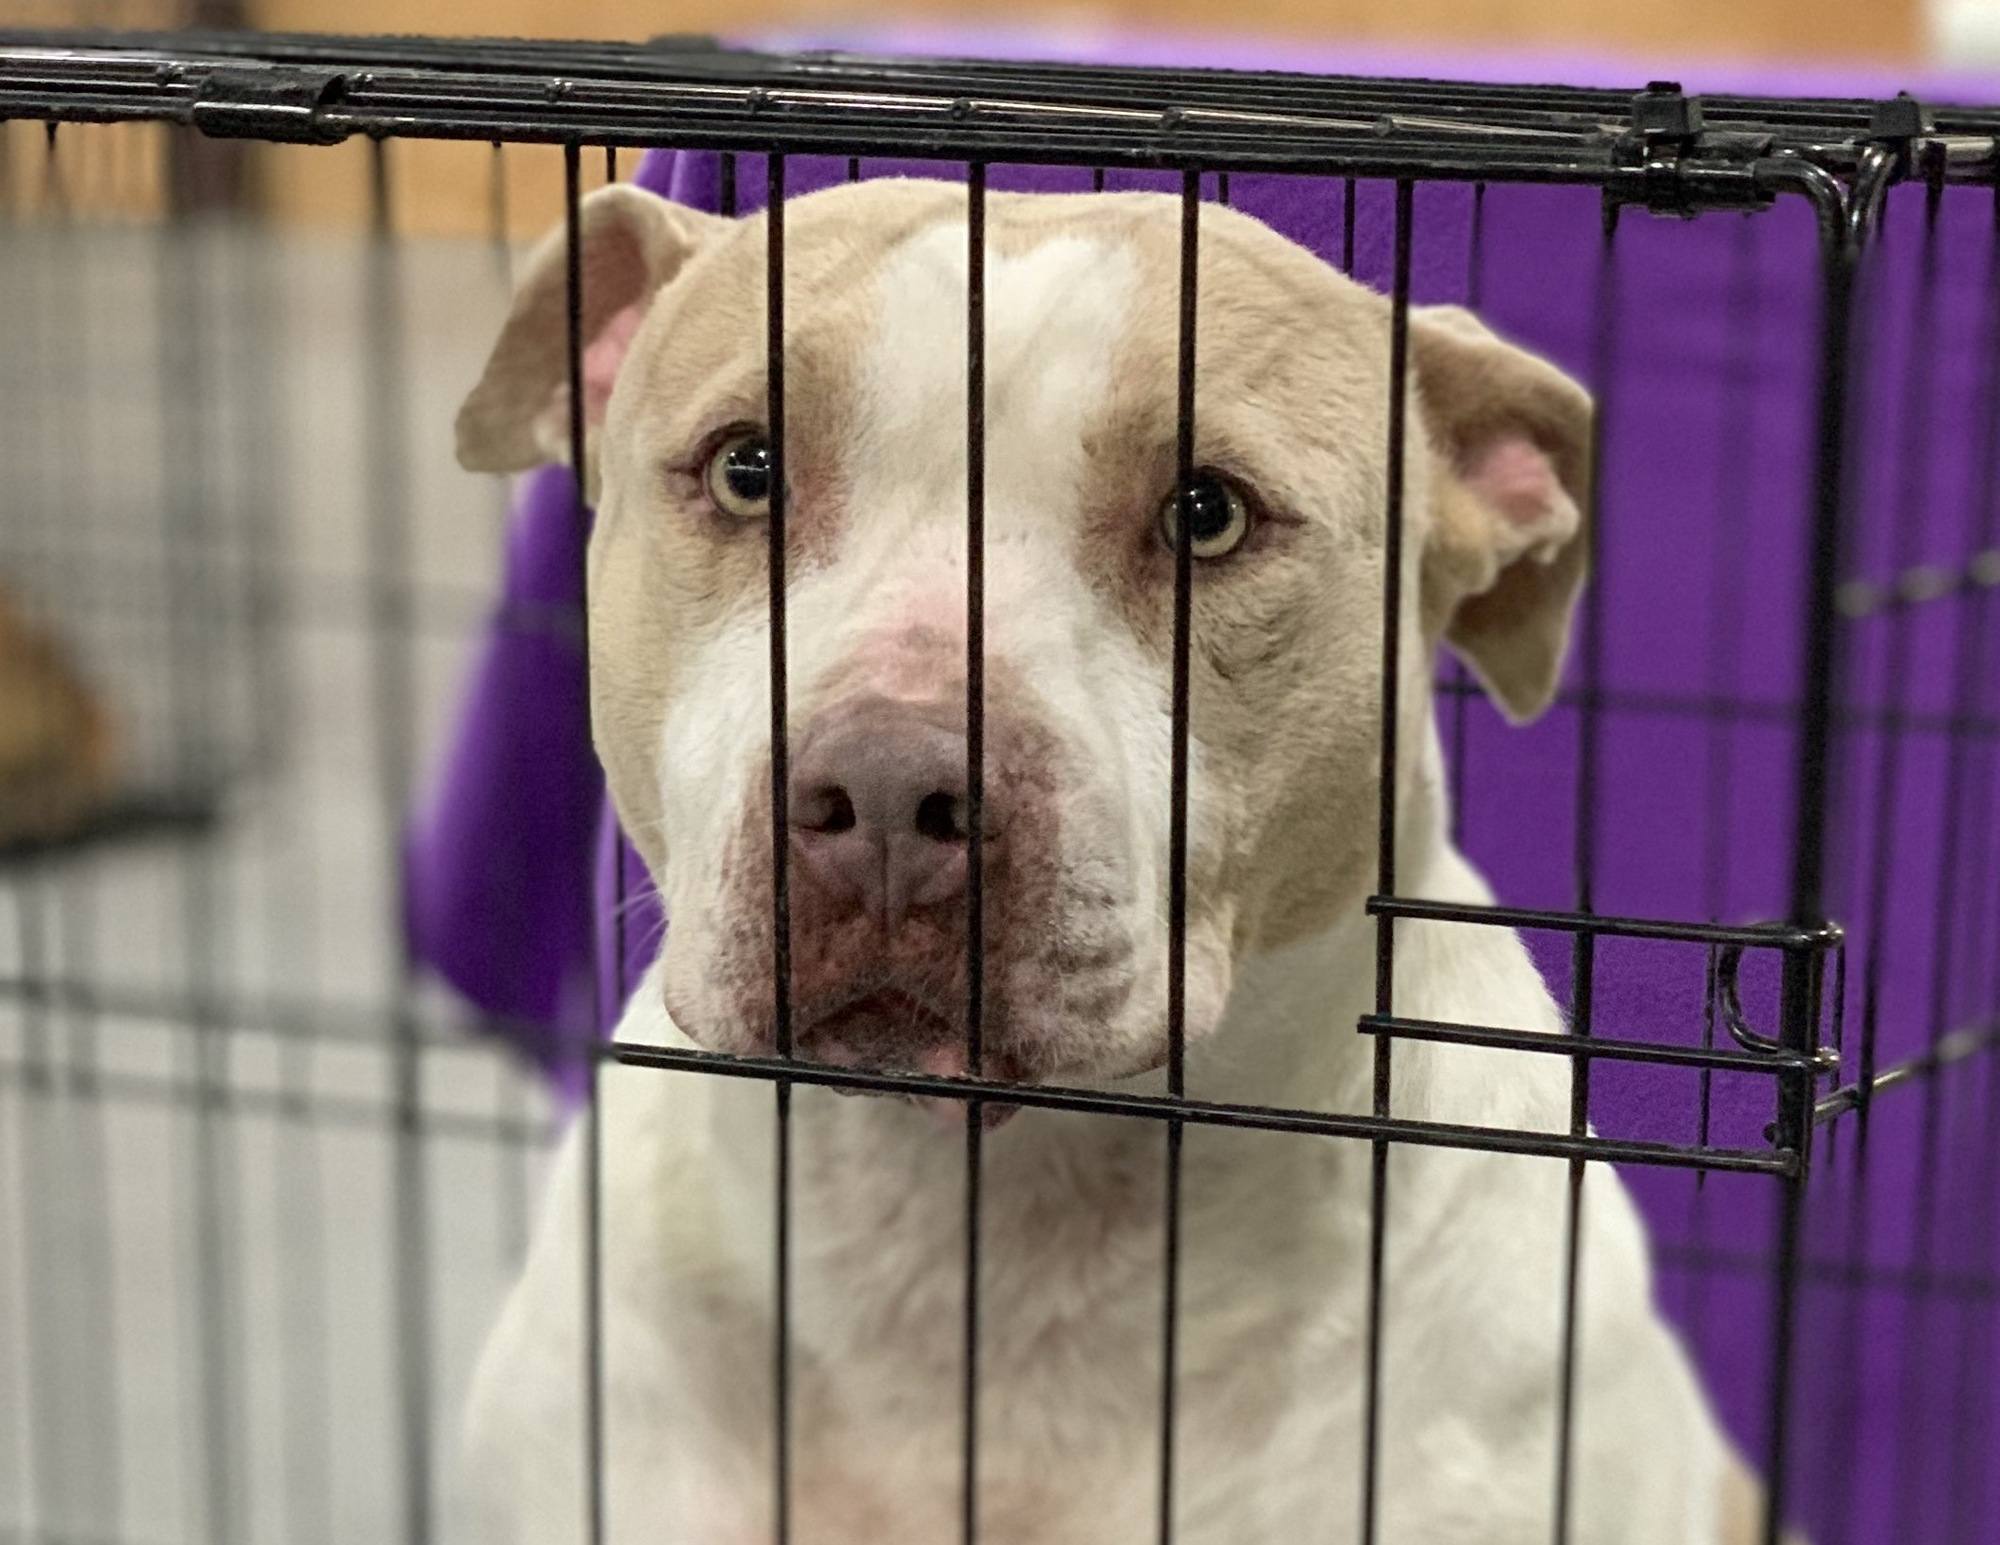 Rose, a cream and butterscotch bully breed mix looks at the camera through her kennel